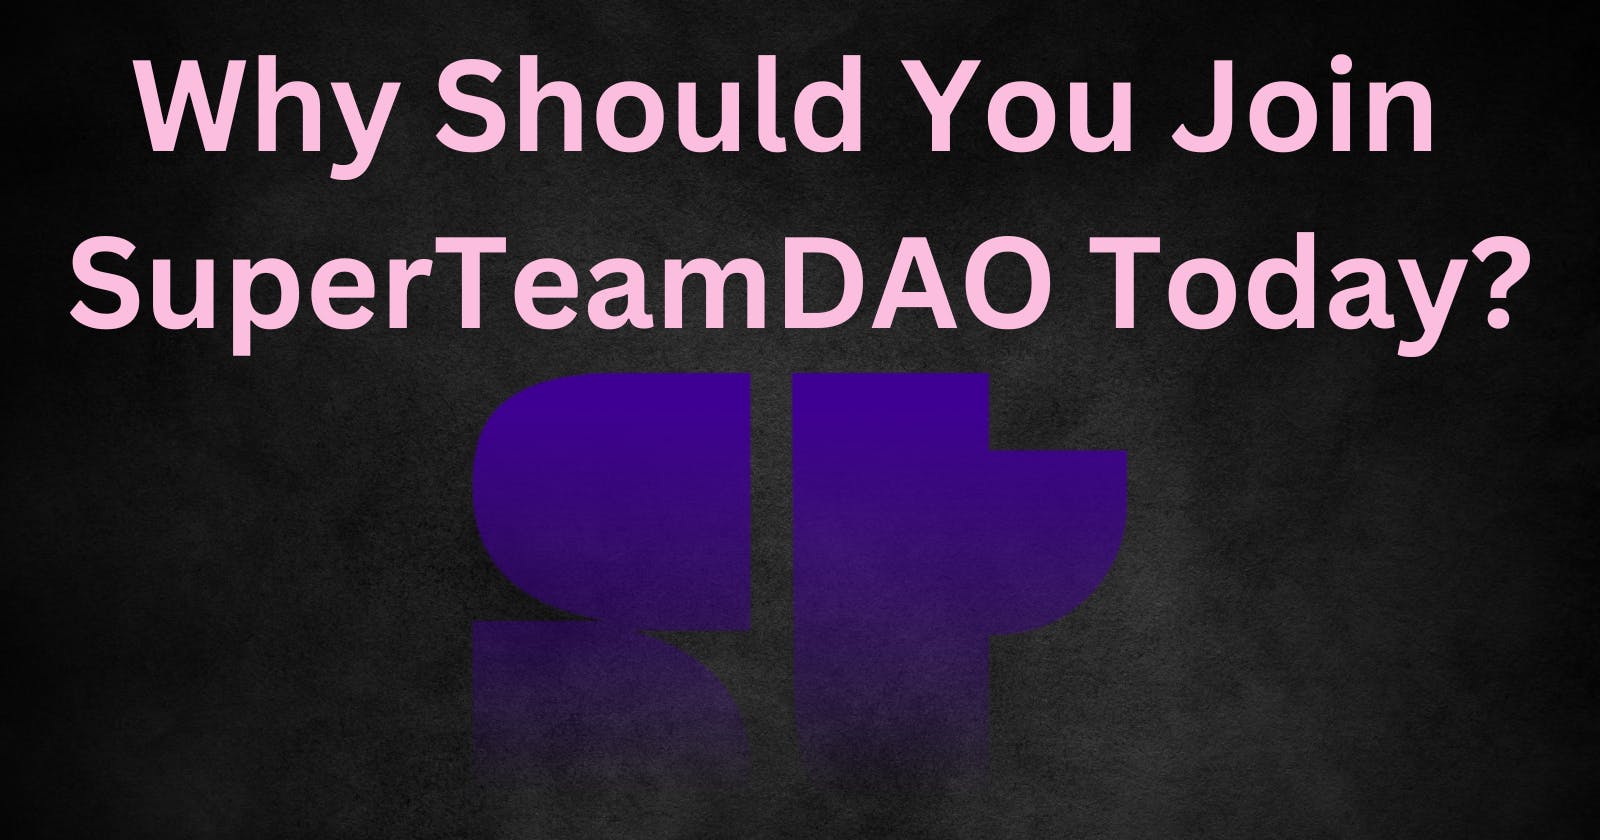 Why Should You Join SuperteamDAO Today?